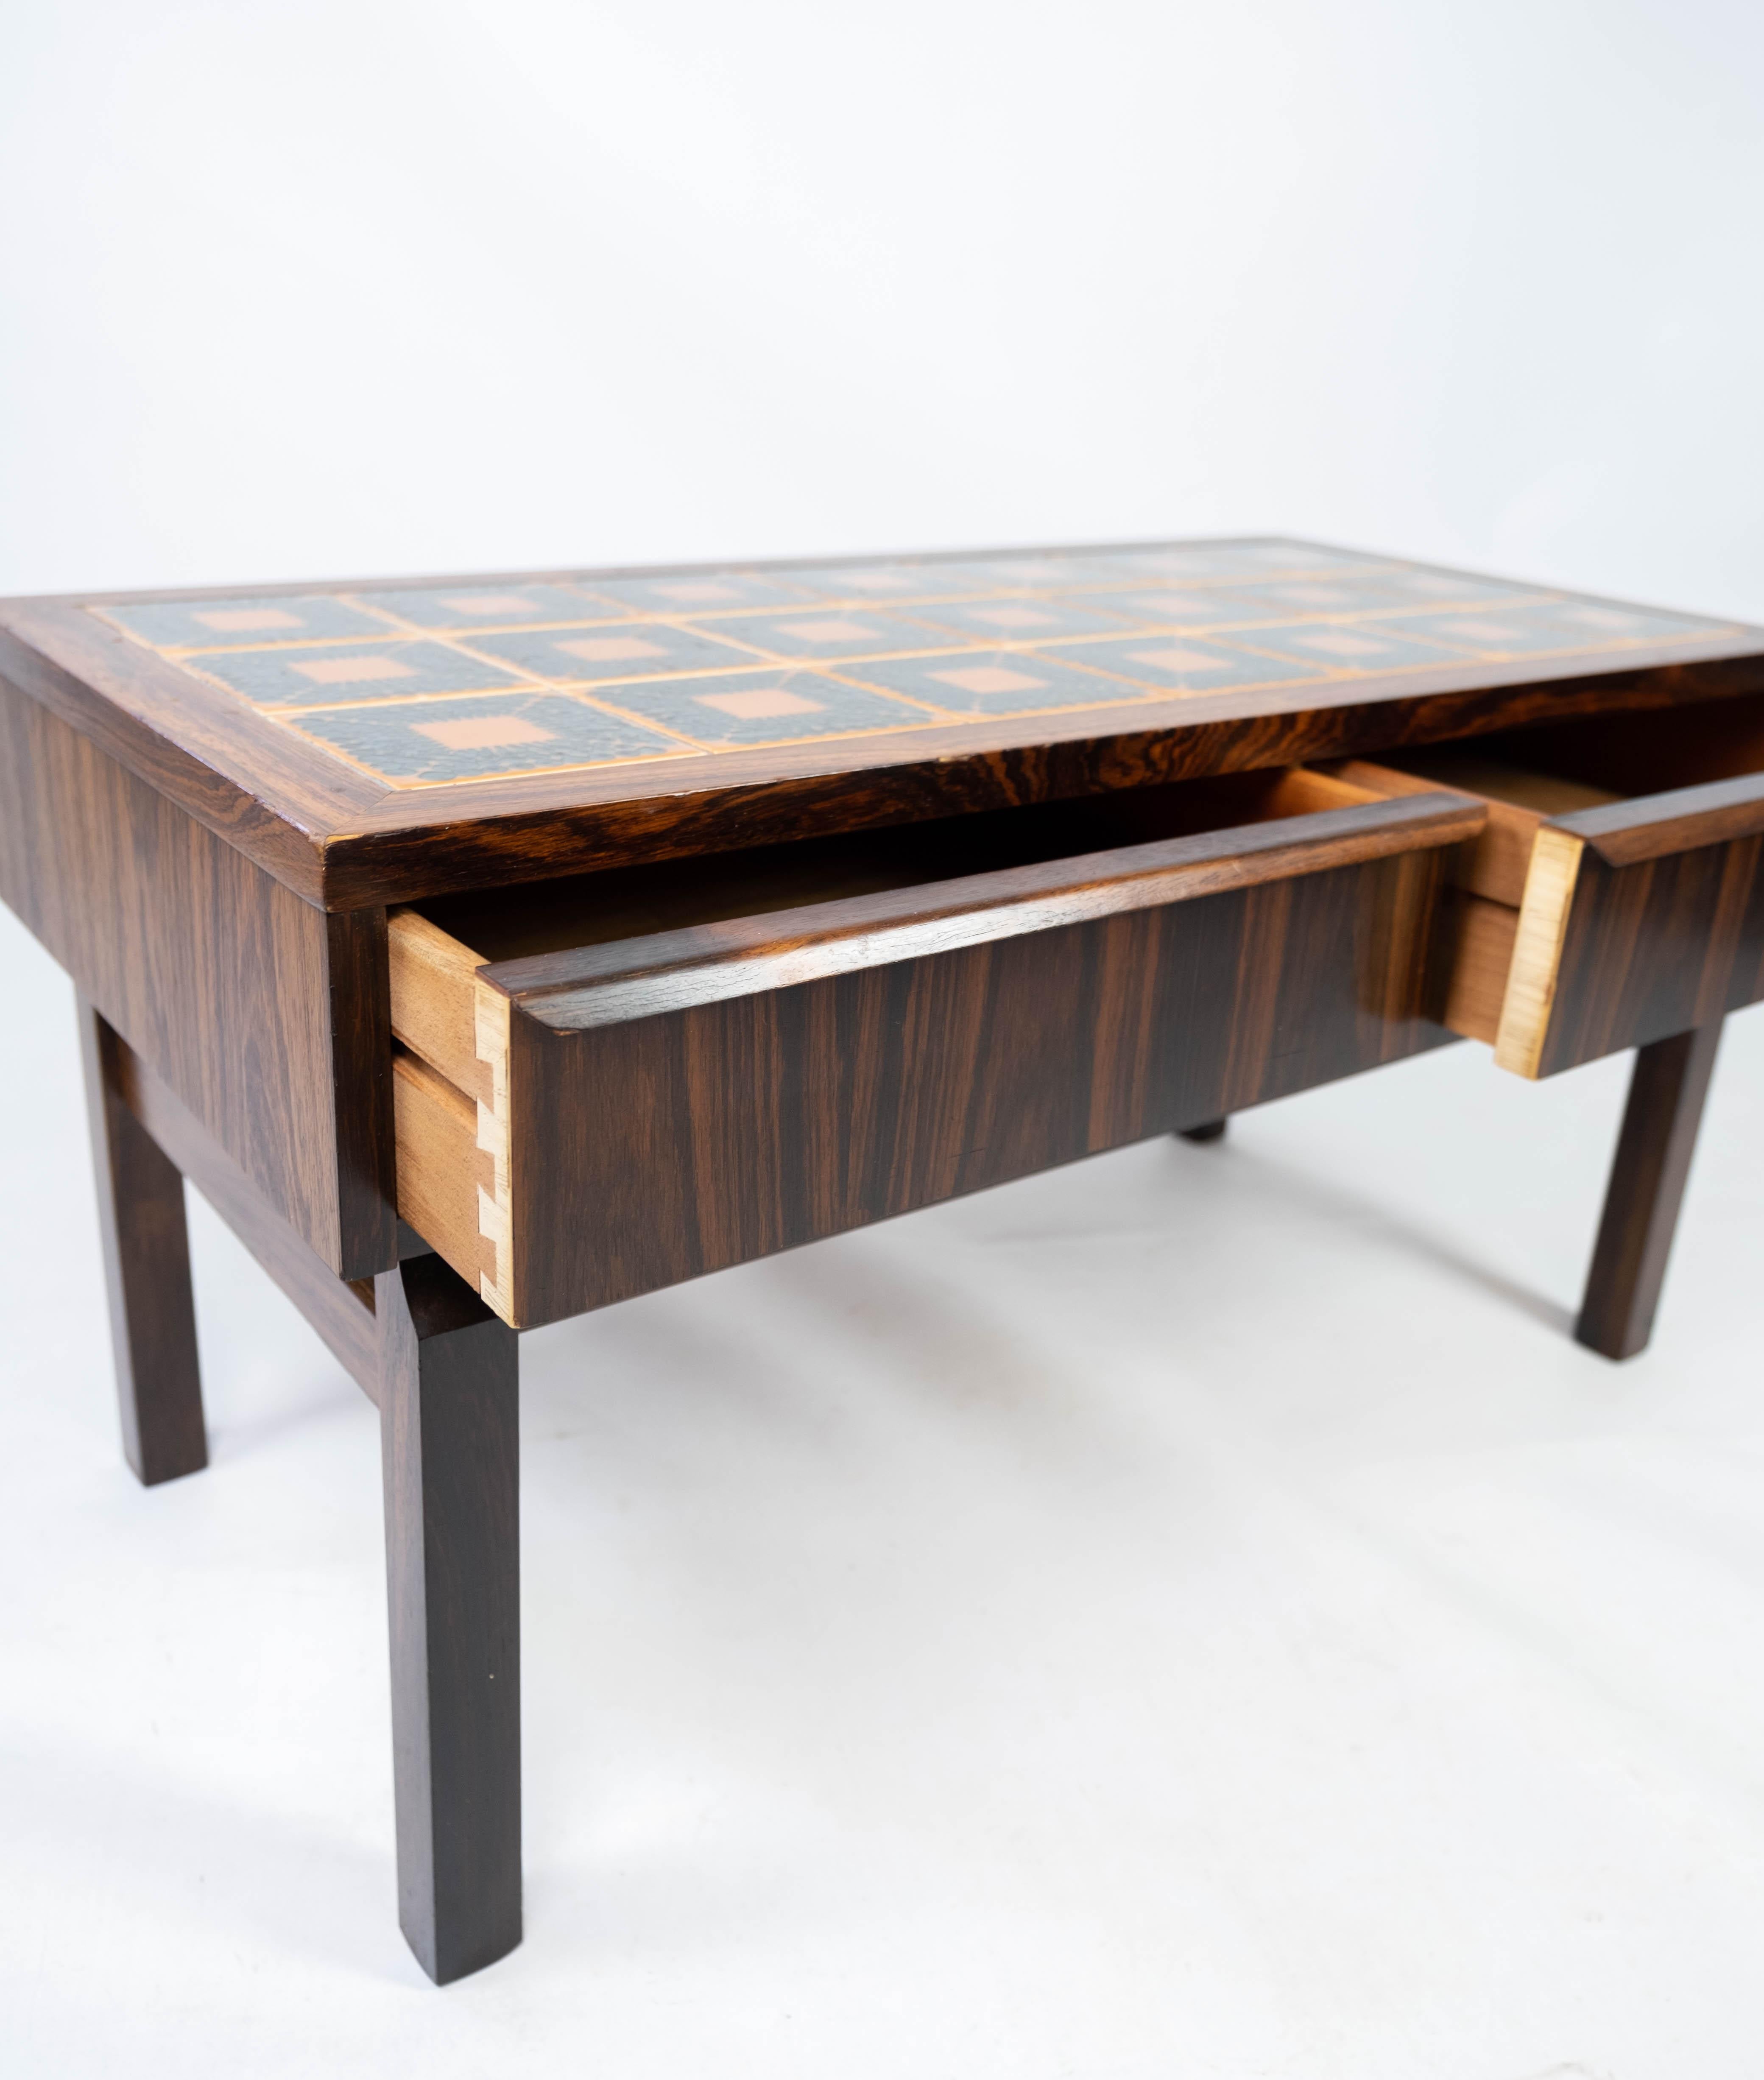 Low Chest in Rosewood and Tiles, of Danish Design from the 1960s For Sale 3